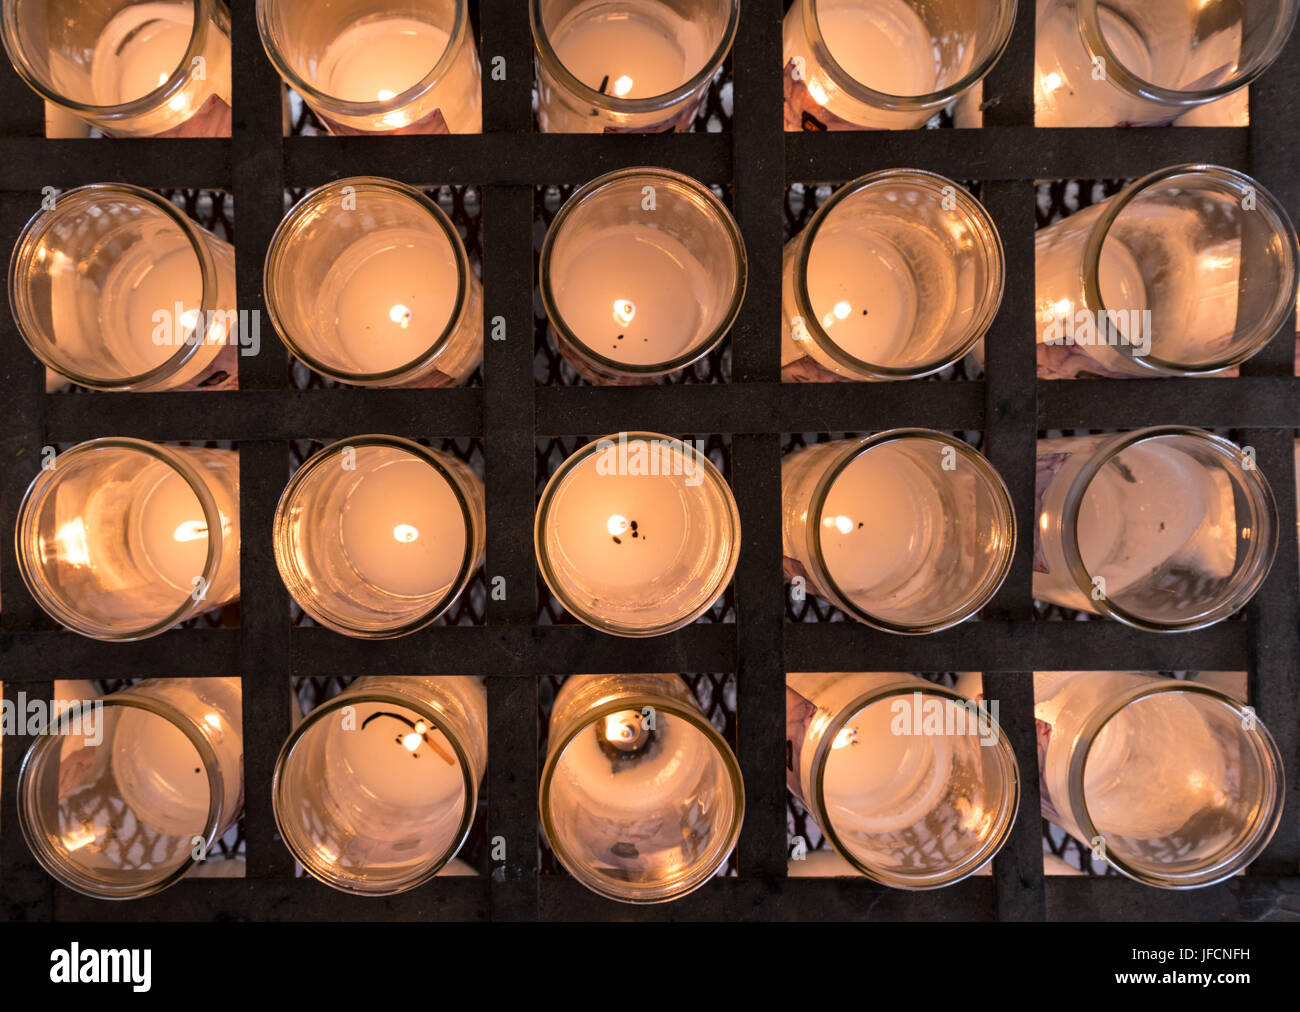 Rows of Votive candles in catholic church Stock Photo